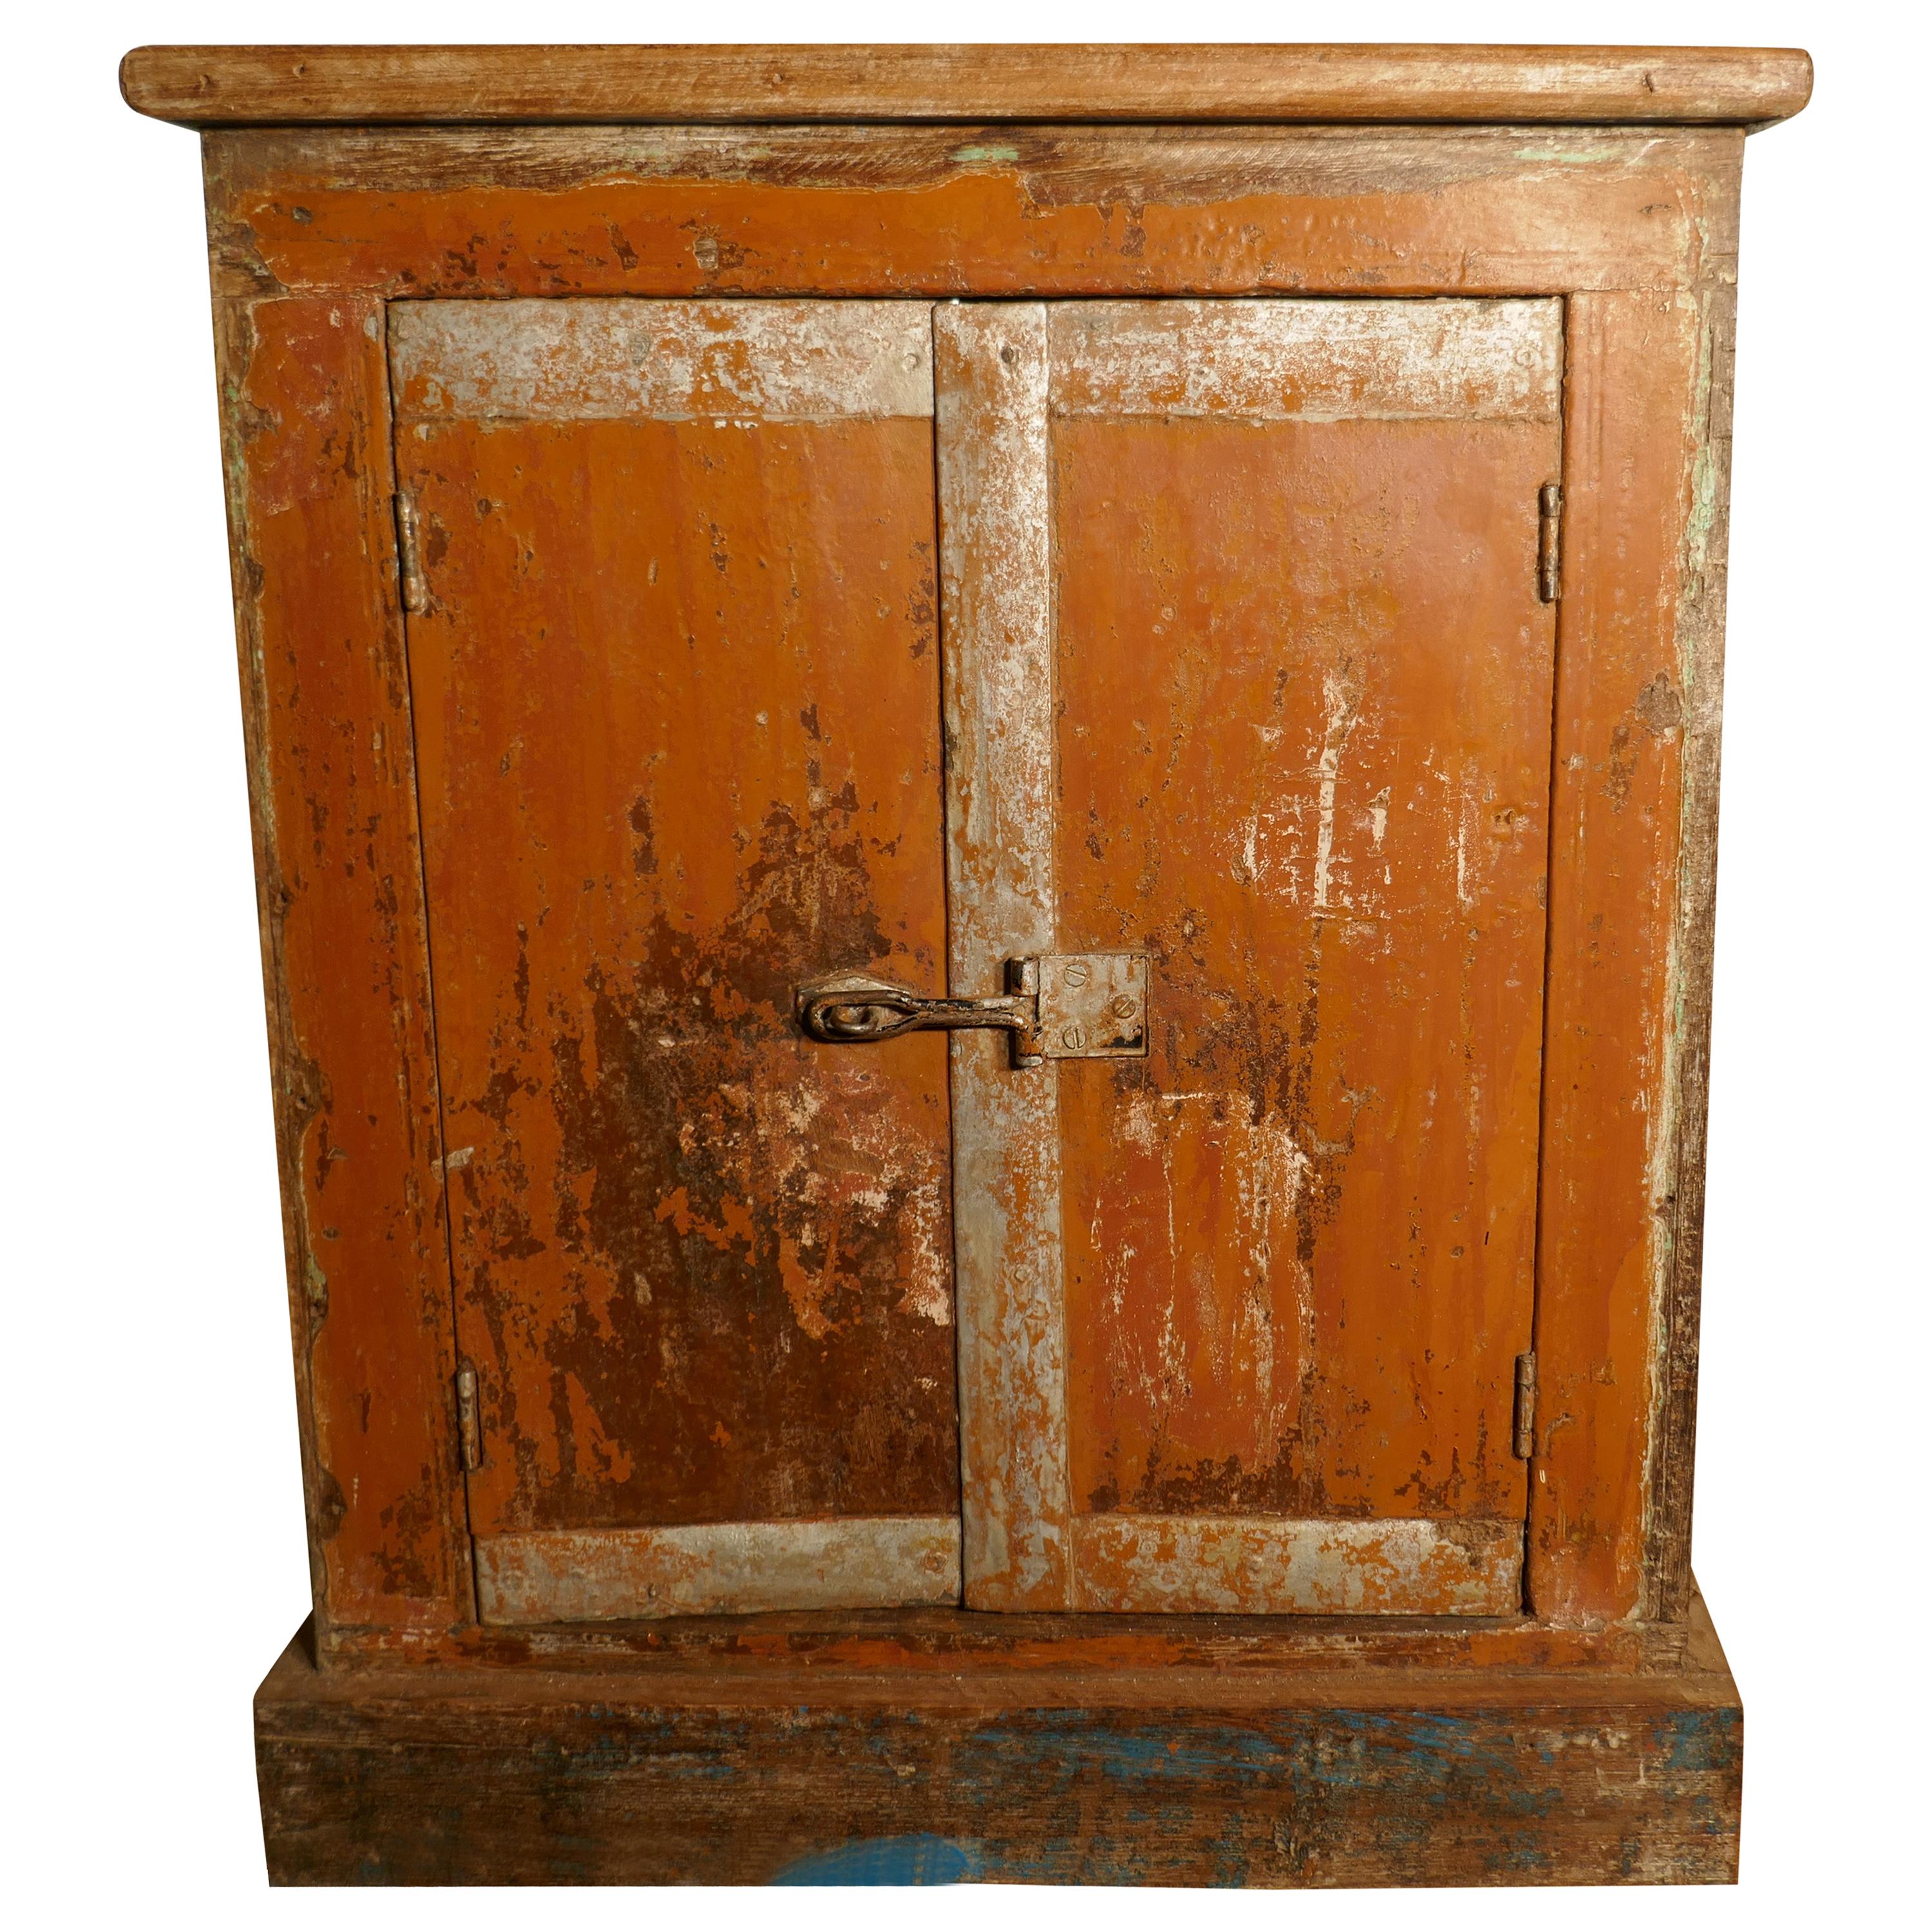 Primitive French Rustic 2-Door Cupboard with Distressed Worn Paint